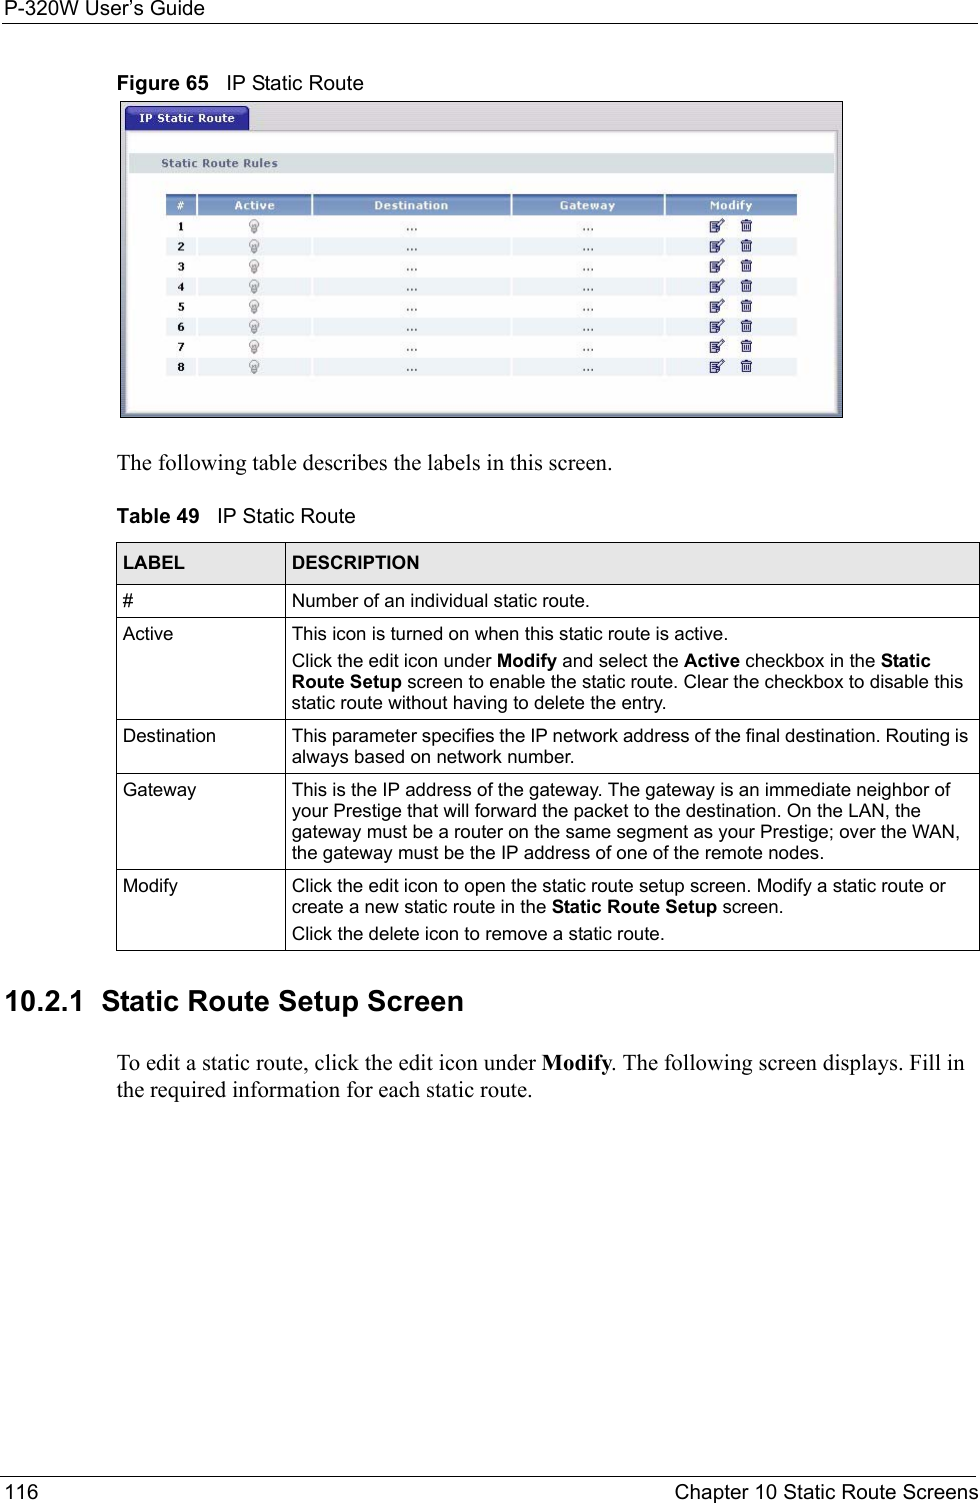 P-320W User’s Guide116  Chapter 10 Static Route ScreensFigure 65   IP Static RouteThe following table describes the labels in this screen.Table 49   IP Static RouteLABEL DESCRIPTION#Number of an individual static route.Active This icon is turned on when this static route is active.Click the edit icon under Modify and select the Active checkbox in the Static Route Setup screen to enable the static route. Clear the checkbox to disable this static route without having to delete the entry.Destination This parameter specifies the IP network address of the final destination. Routing is always based on network number. Gateway This is the IP address of the gateway. The gateway is an immediate neighbor of your Prestige that will forward the packet to the destination. On the LAN, the gateway must be a router on the same segment as your Prestige; over the WAN, the gateway must be the IP address of one of the remote nodes.Modify Click the edit icon to open the static route setup screen. Modify a static route or create a new static route in the Static Route Setup screen.Click the delete icon to remove a static route.10.2.1  Static Route Setup ScreenTo edit a static route, click the edit icon under Modify. The following screen displays. Fill in the required information for each static route.